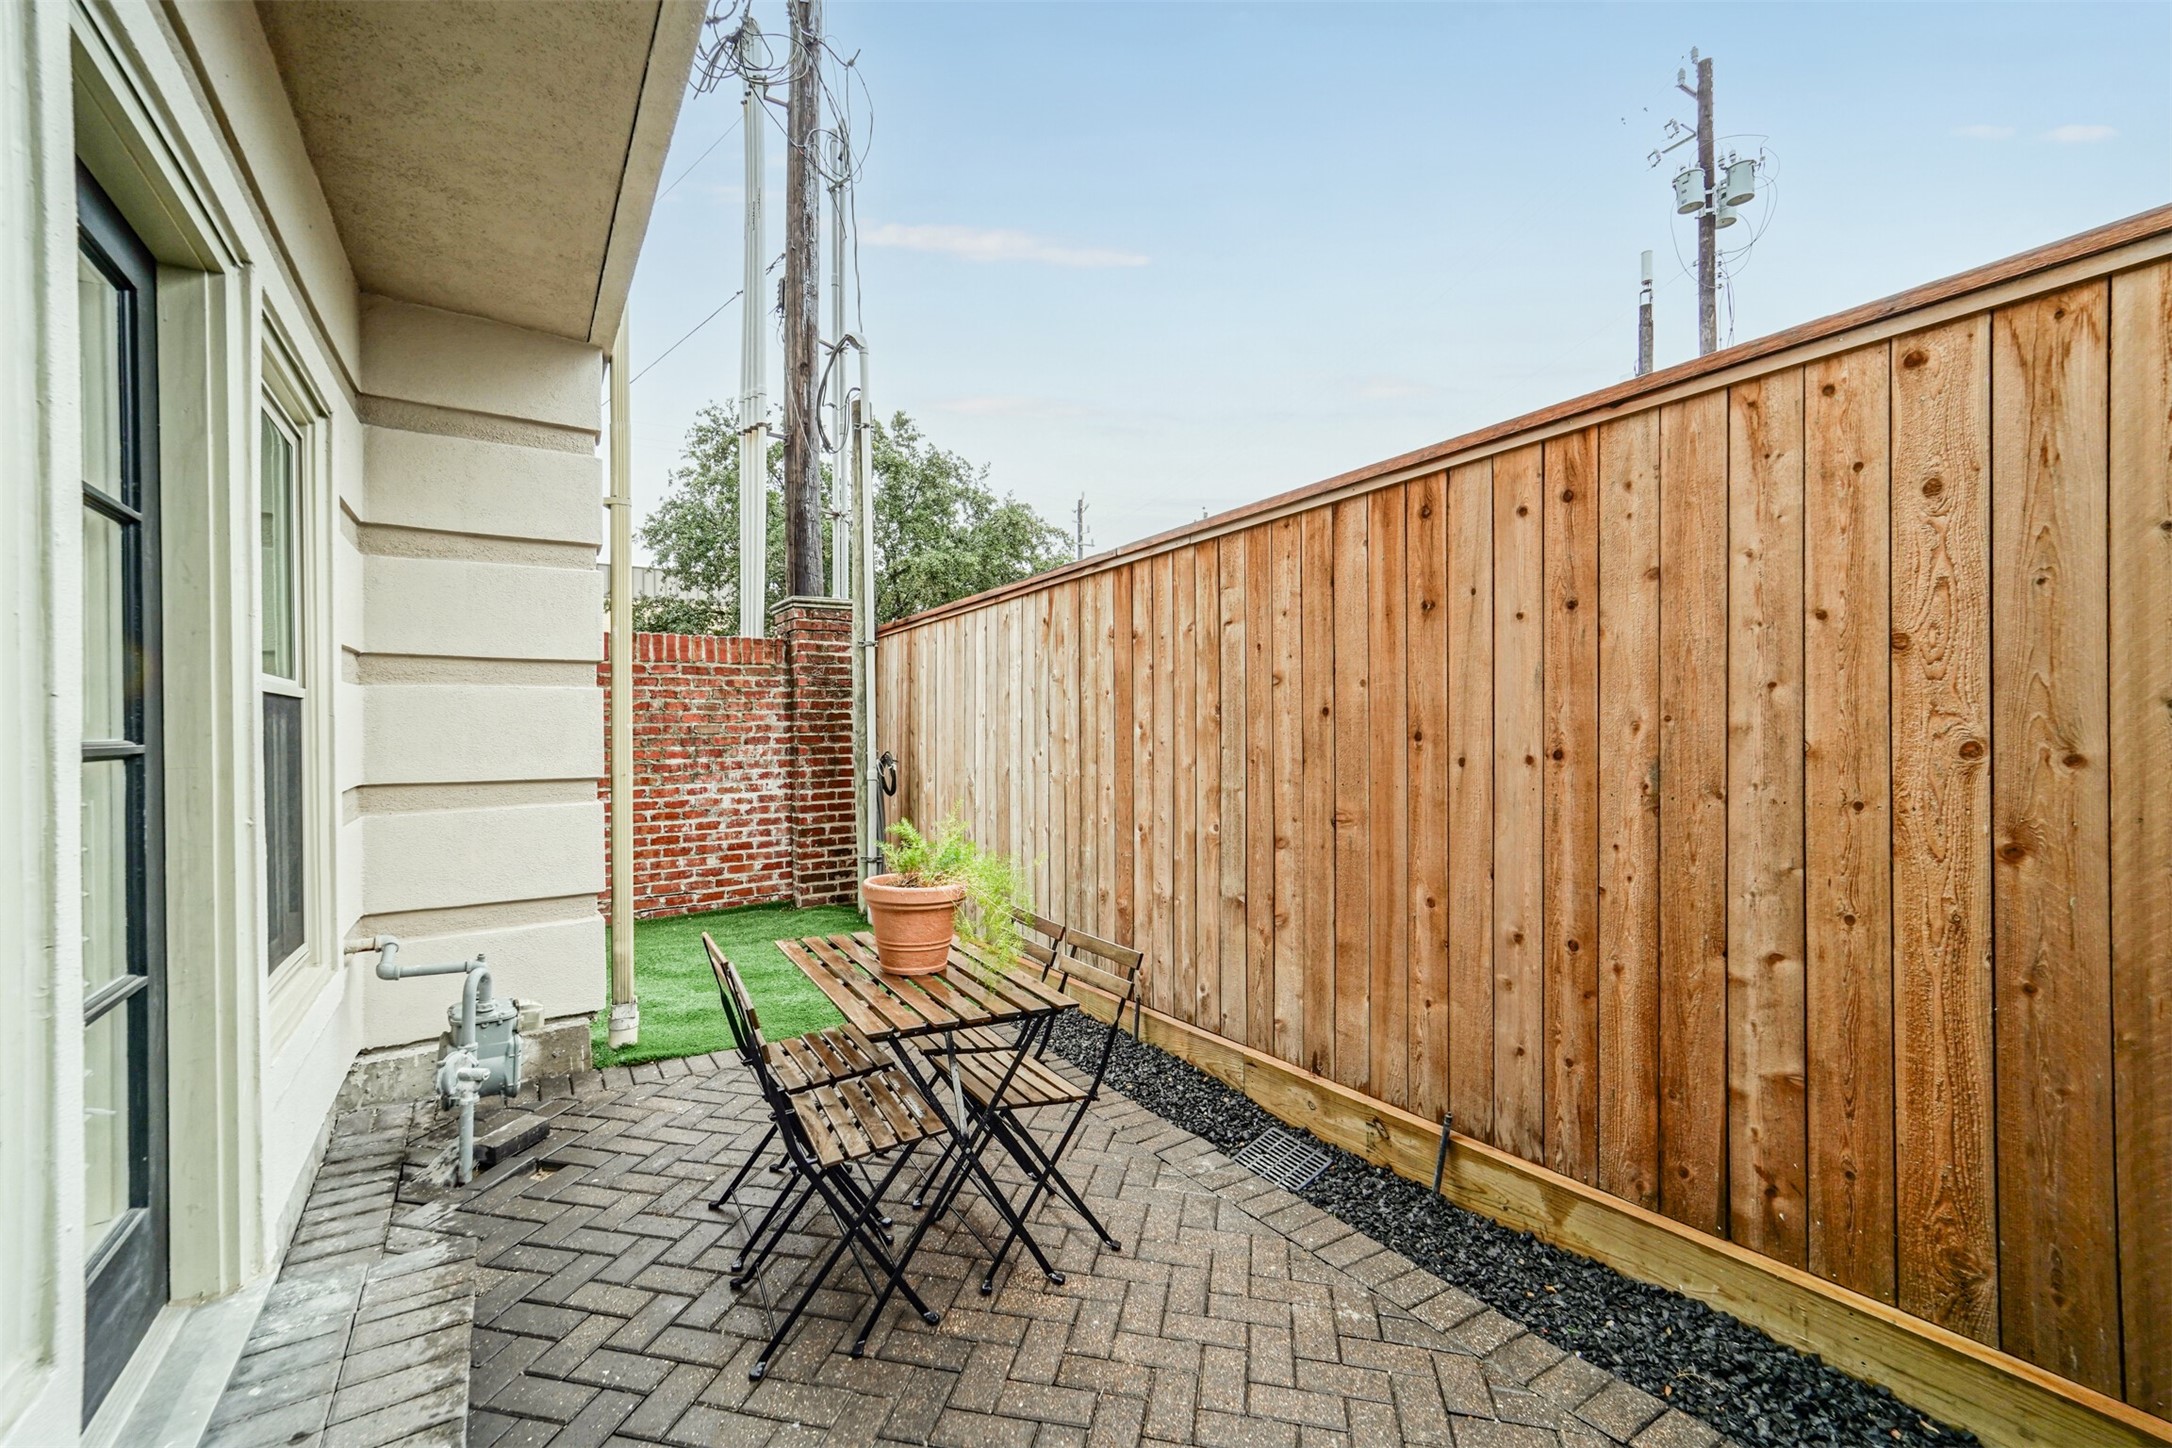 Hard to find paved patio area with newly replaced fence.